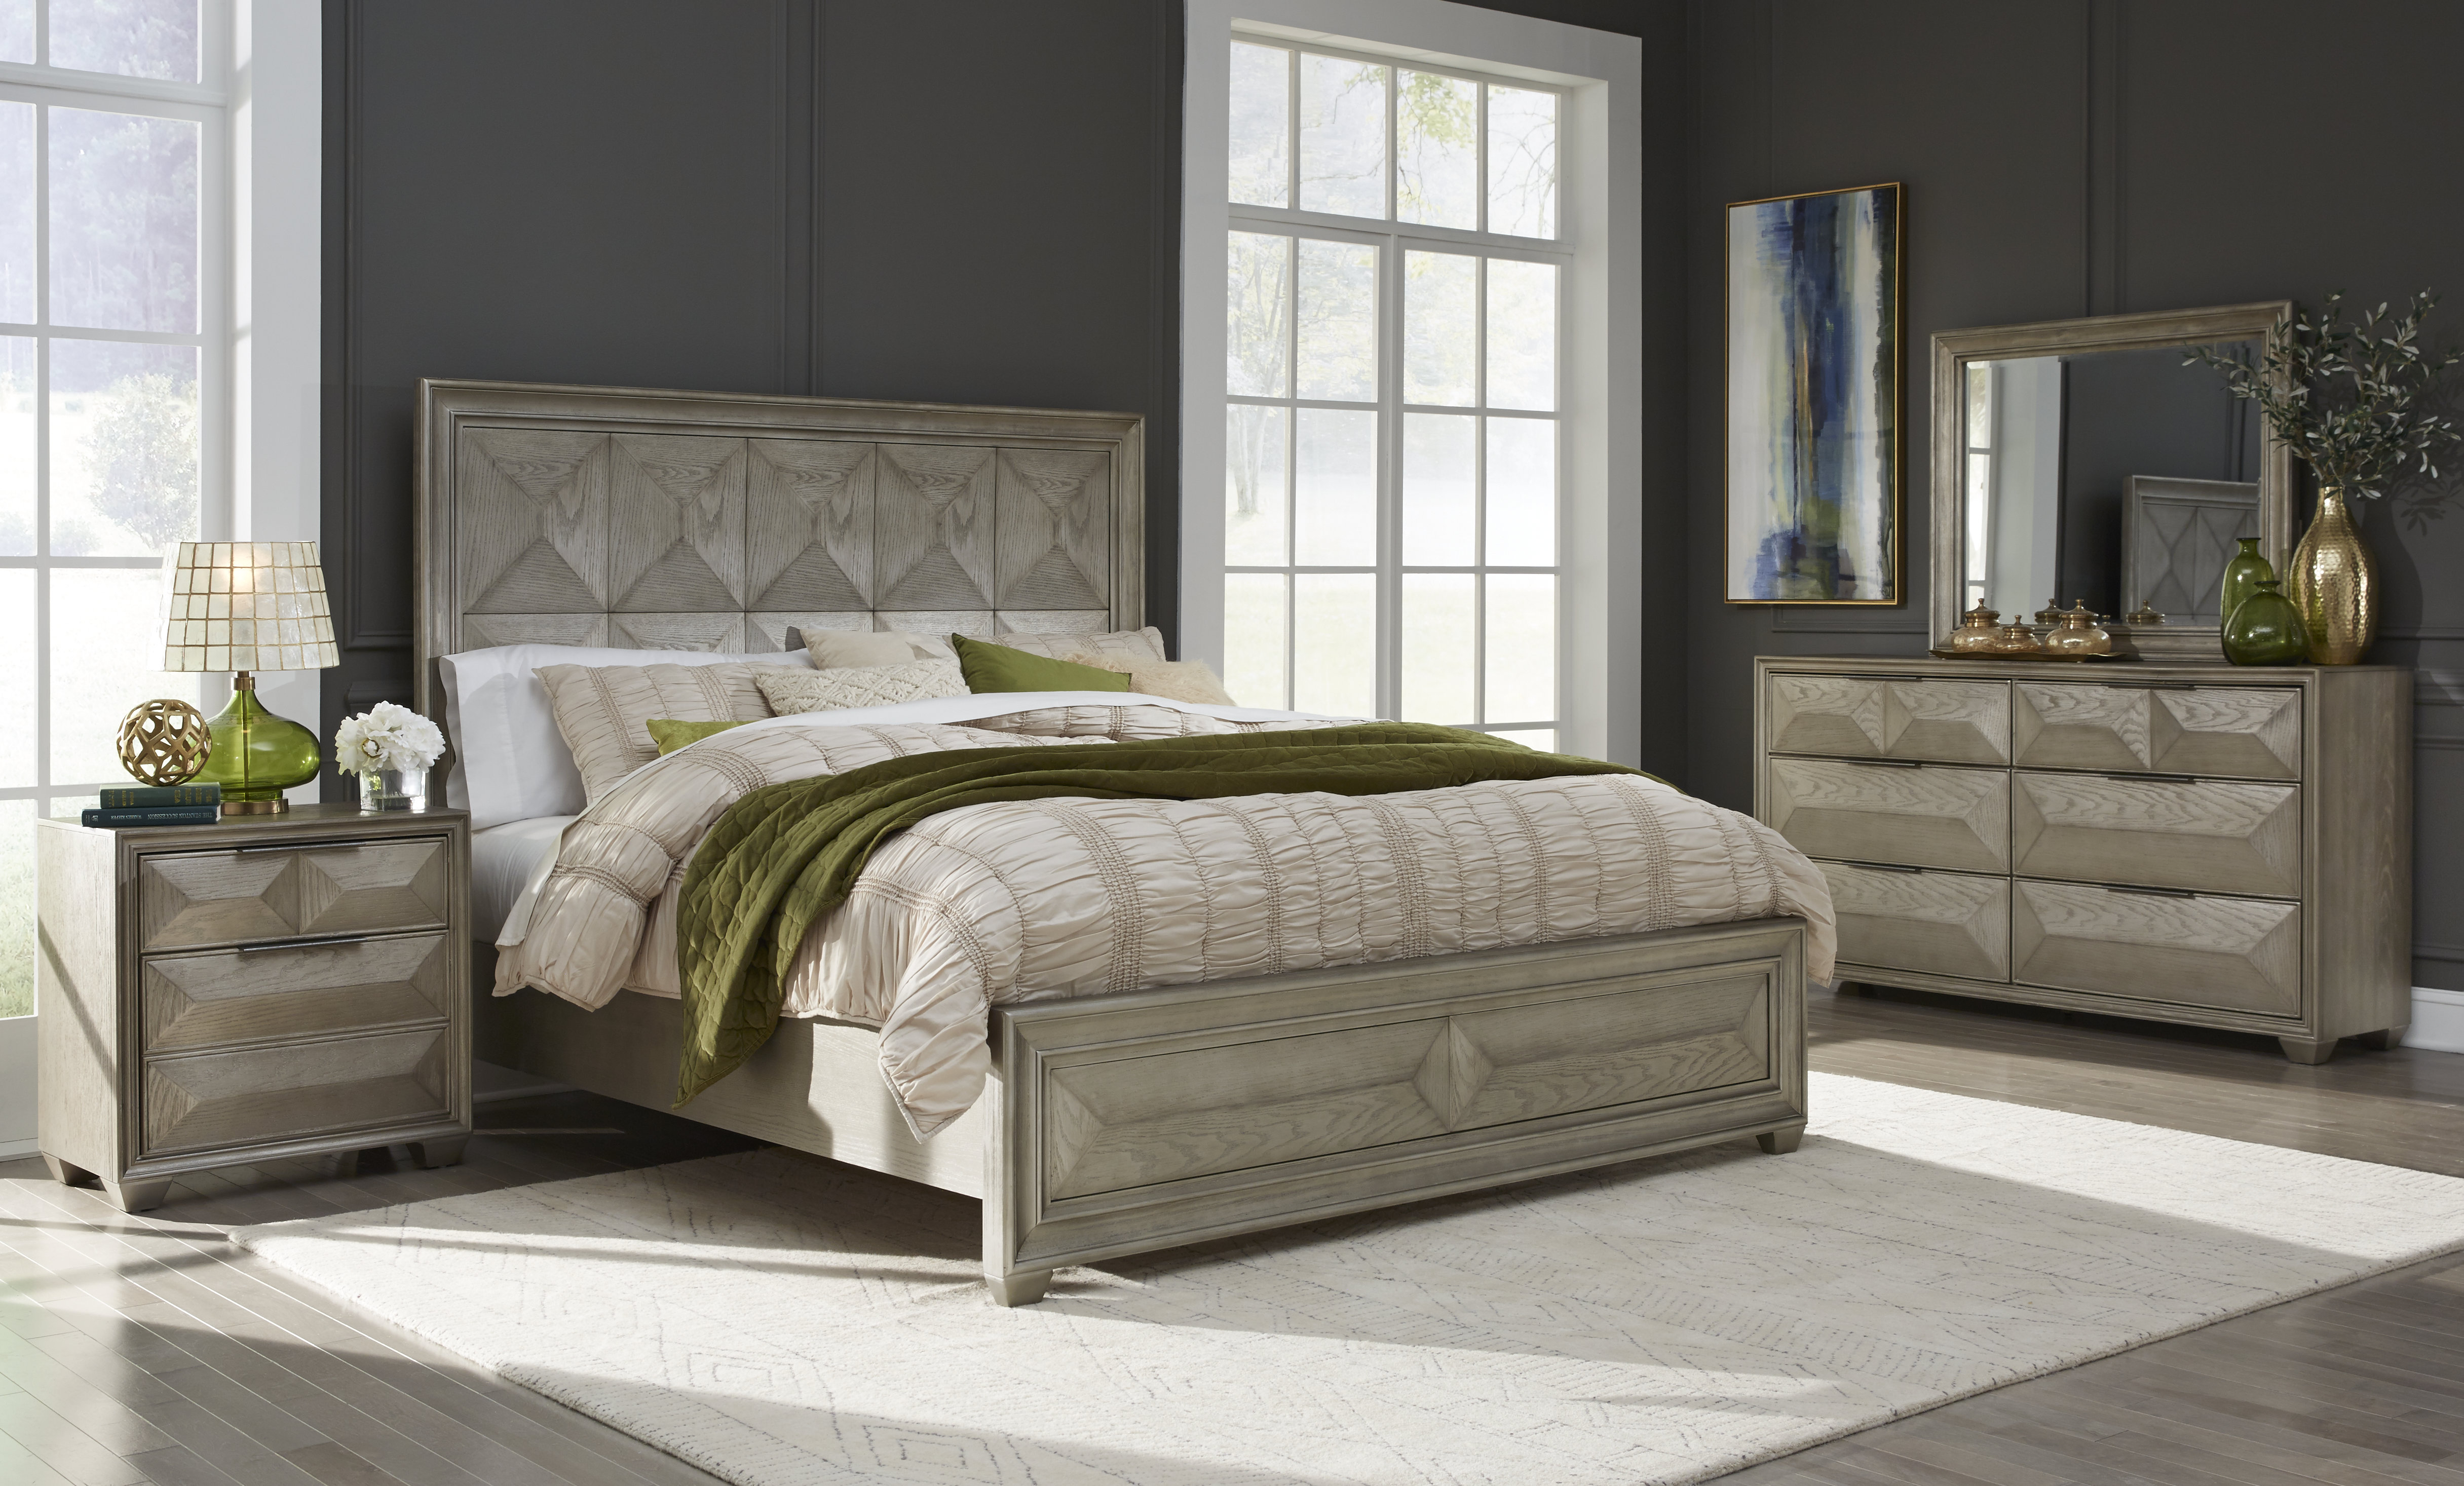 Daley King Standard Configurable Bedroom Set pertaining to proportions 4863 X 2933